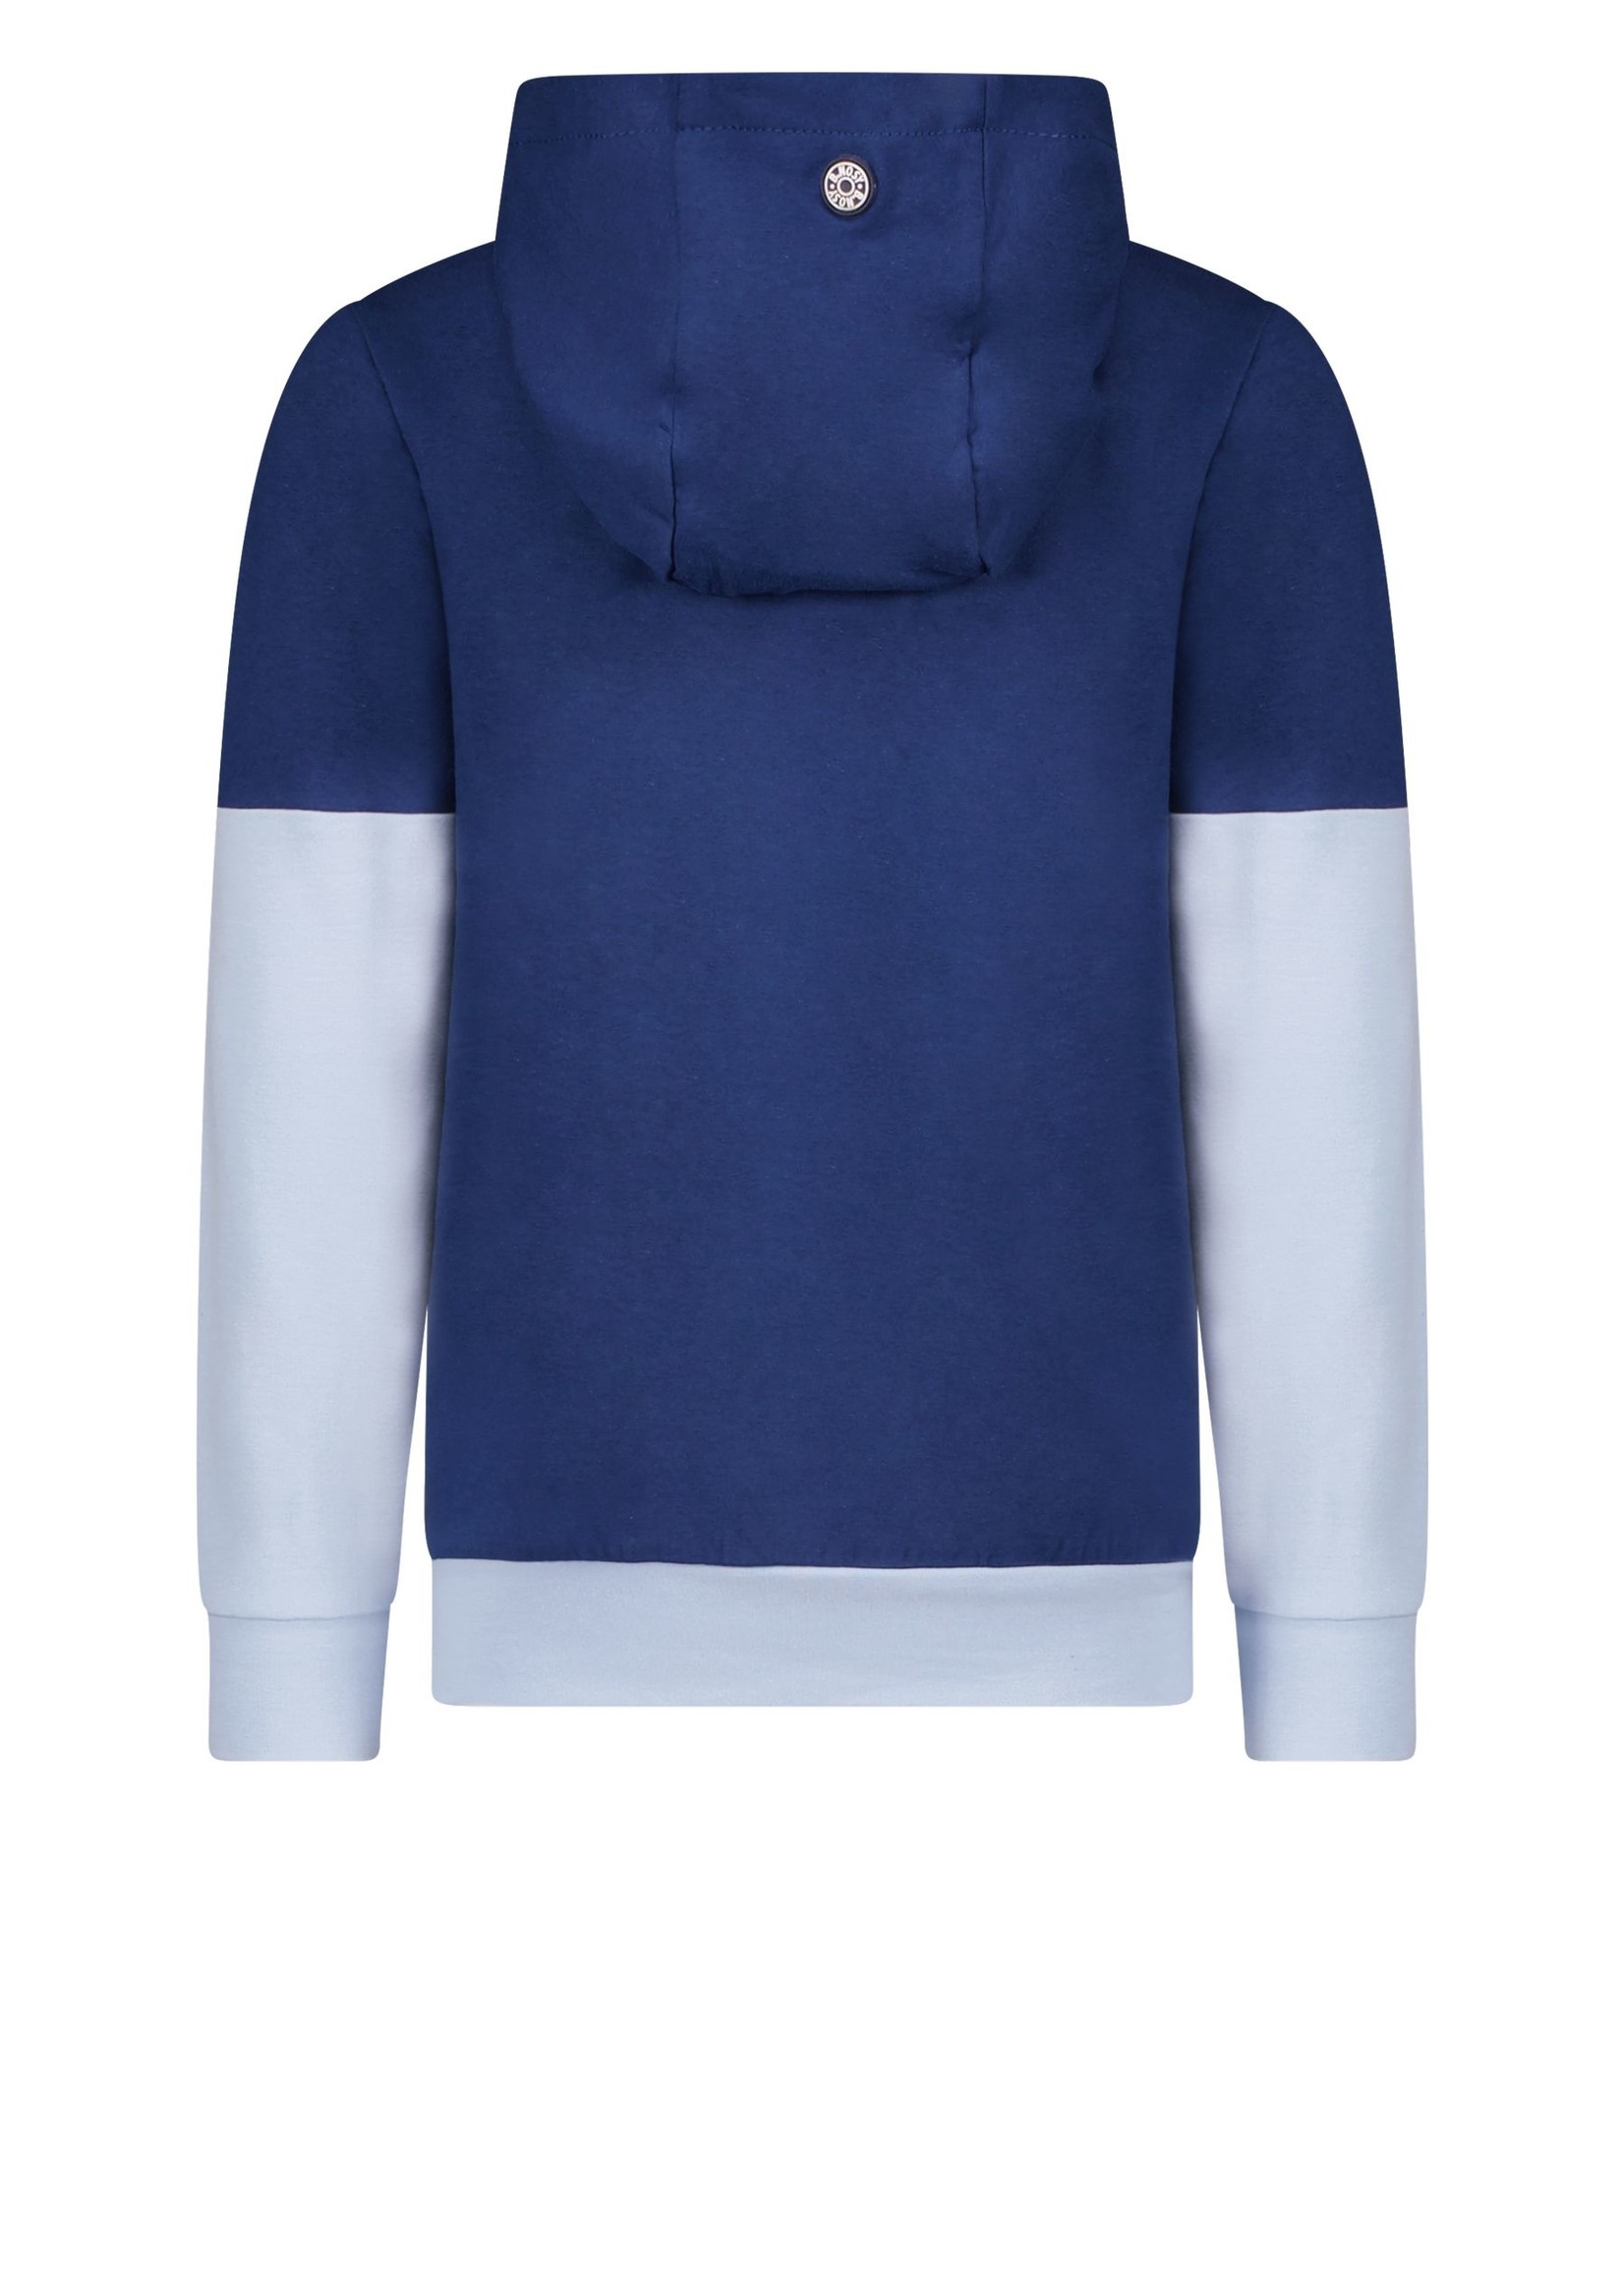 B-Nosy Boys hooded sweater with vertical c&s panels and print on chest, lake blue